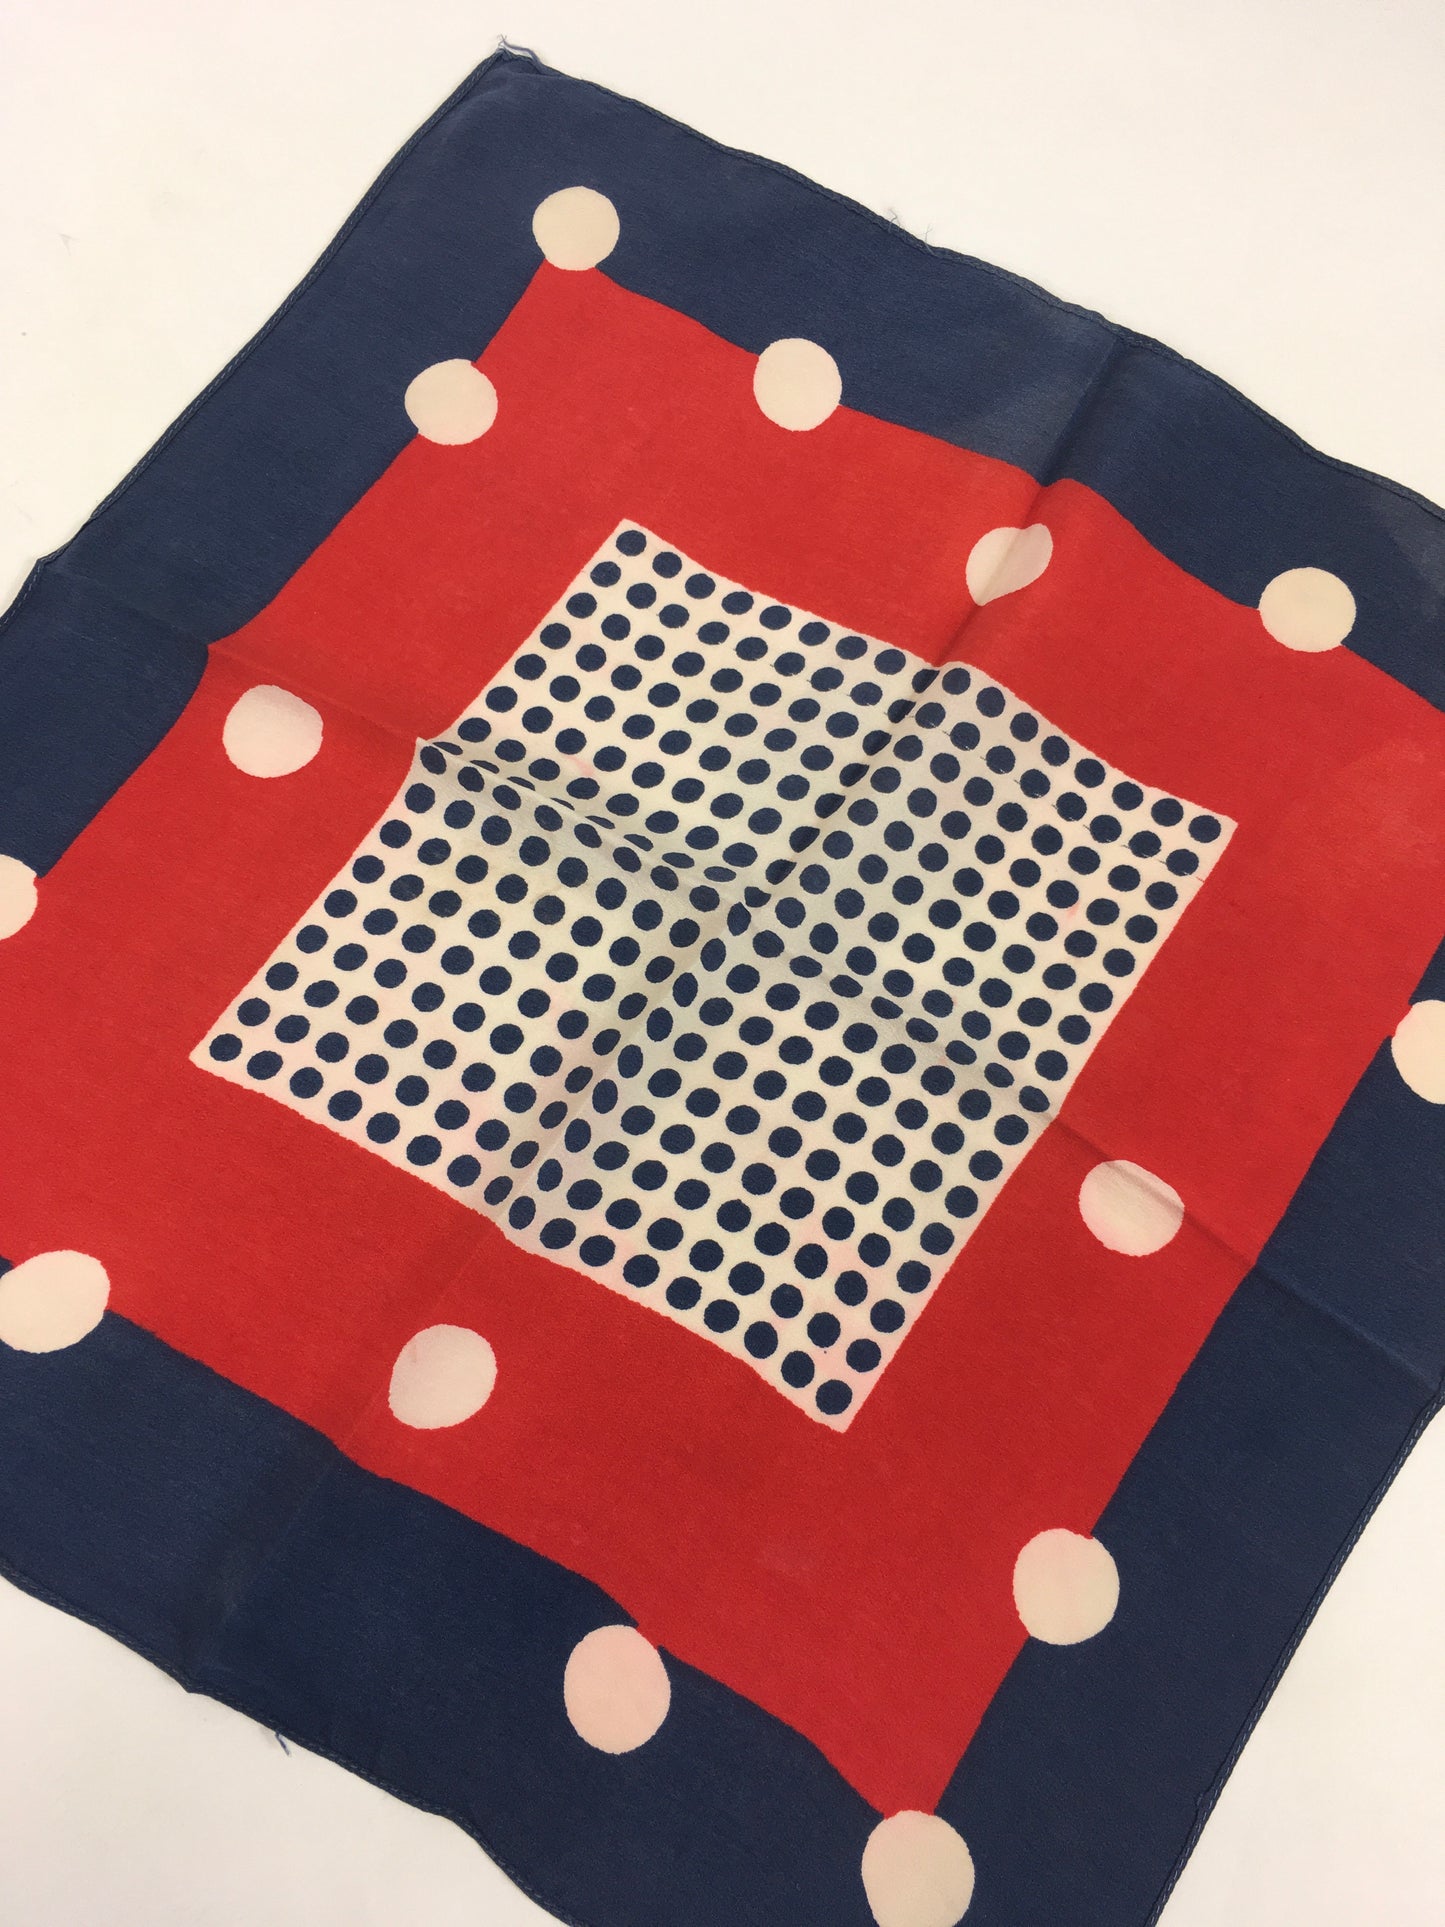 Original 1940's Fabulous Rayon Hankie - In Red, White and Blue